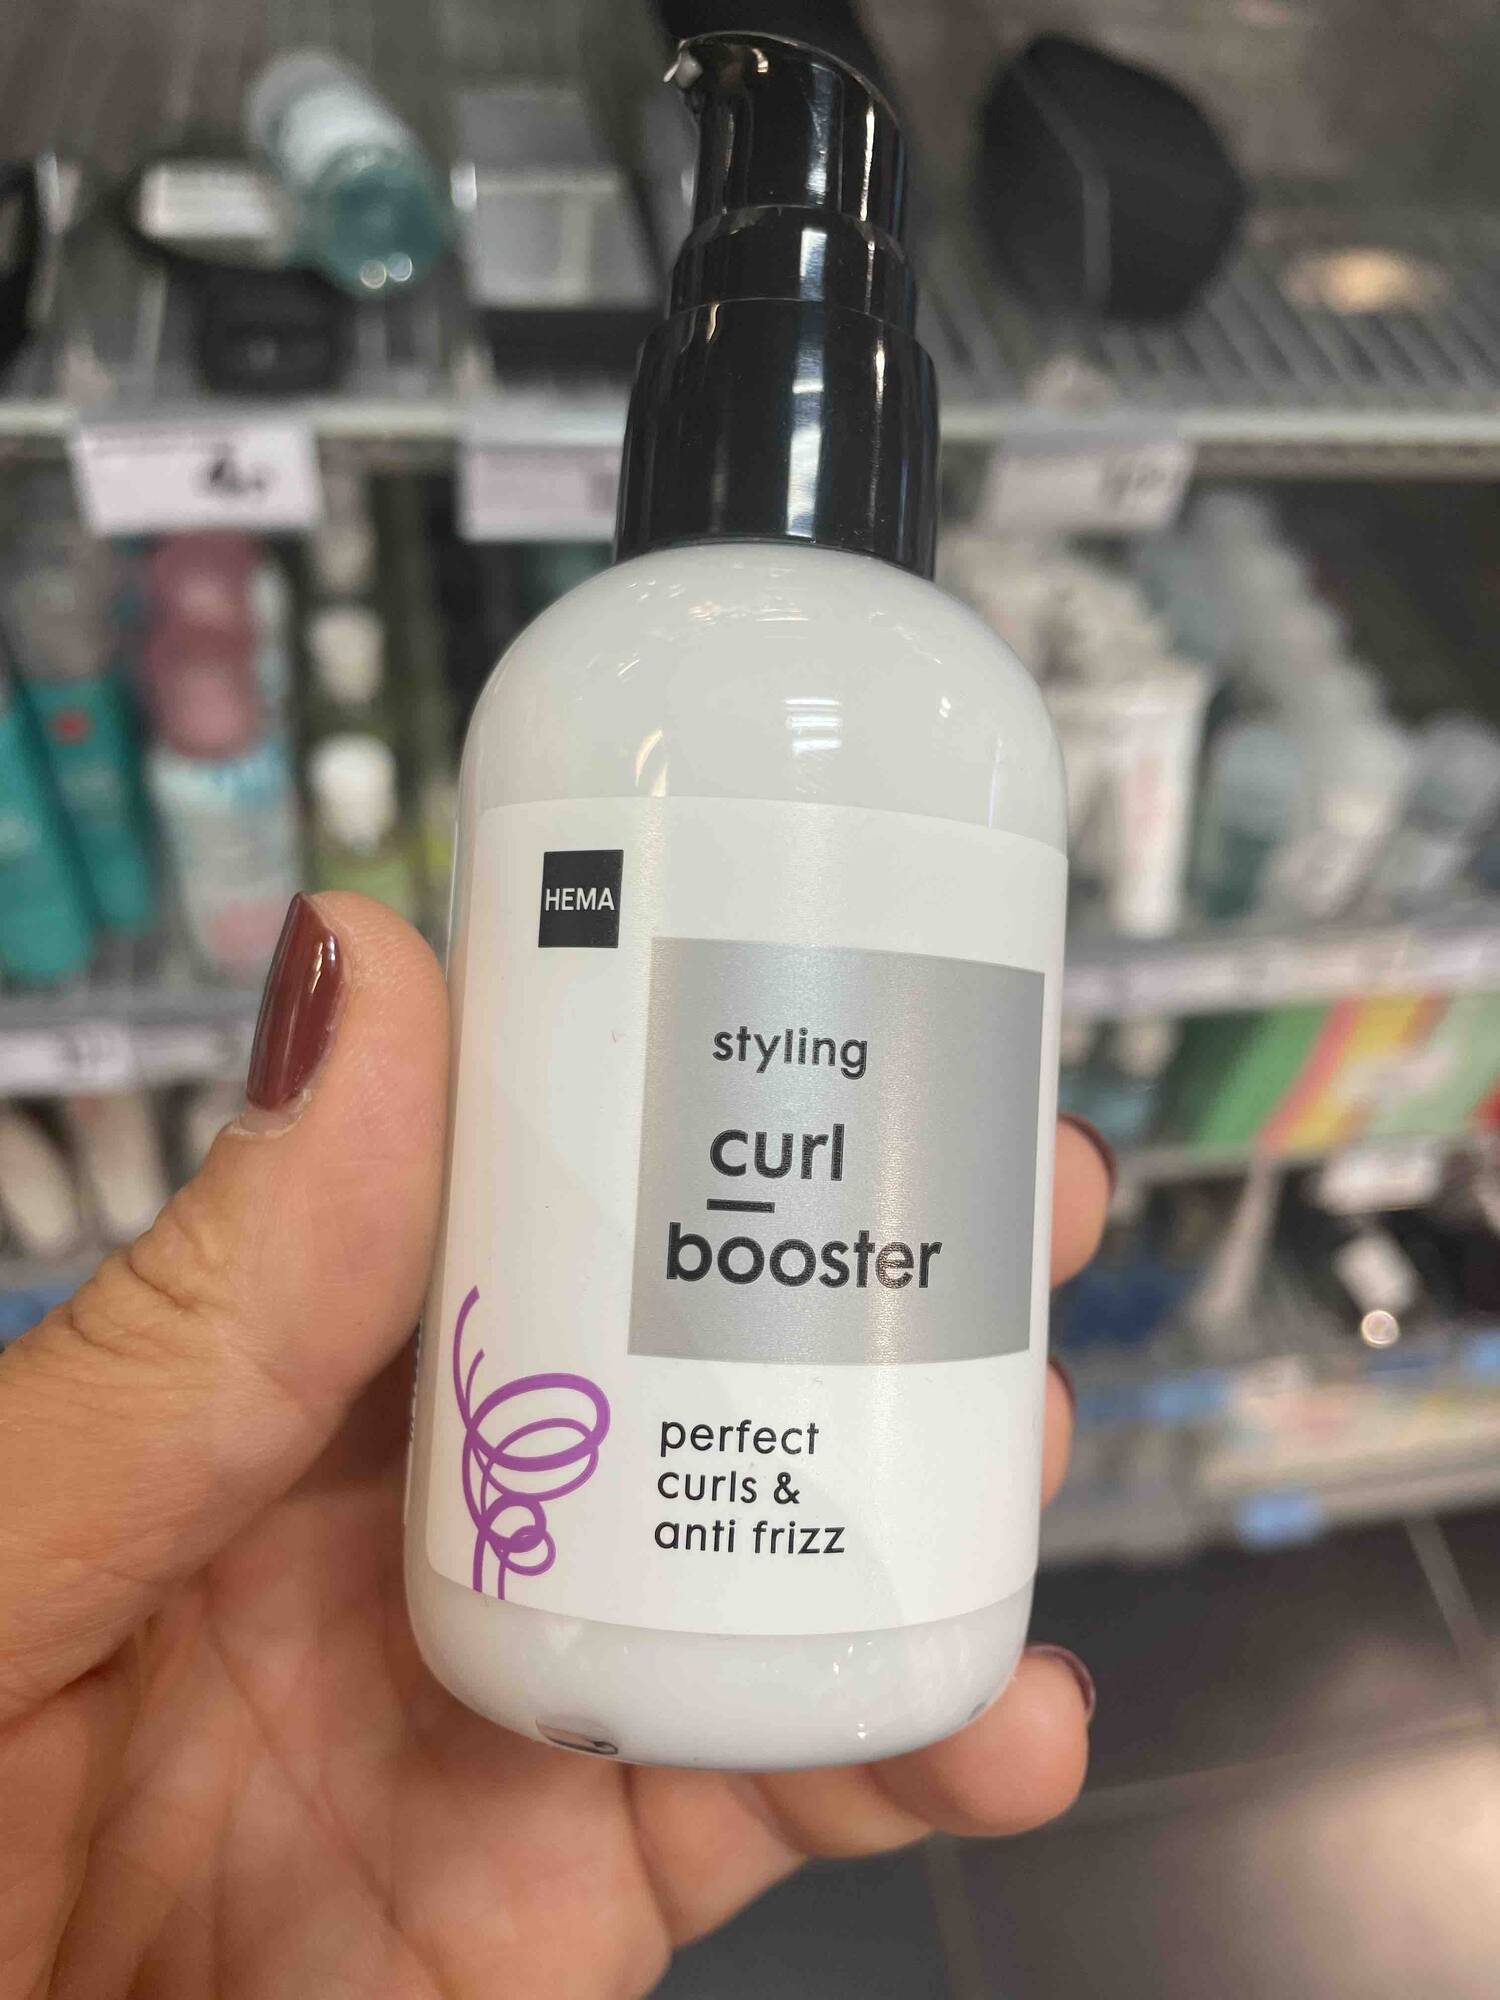 HEMA - Styling curl booster